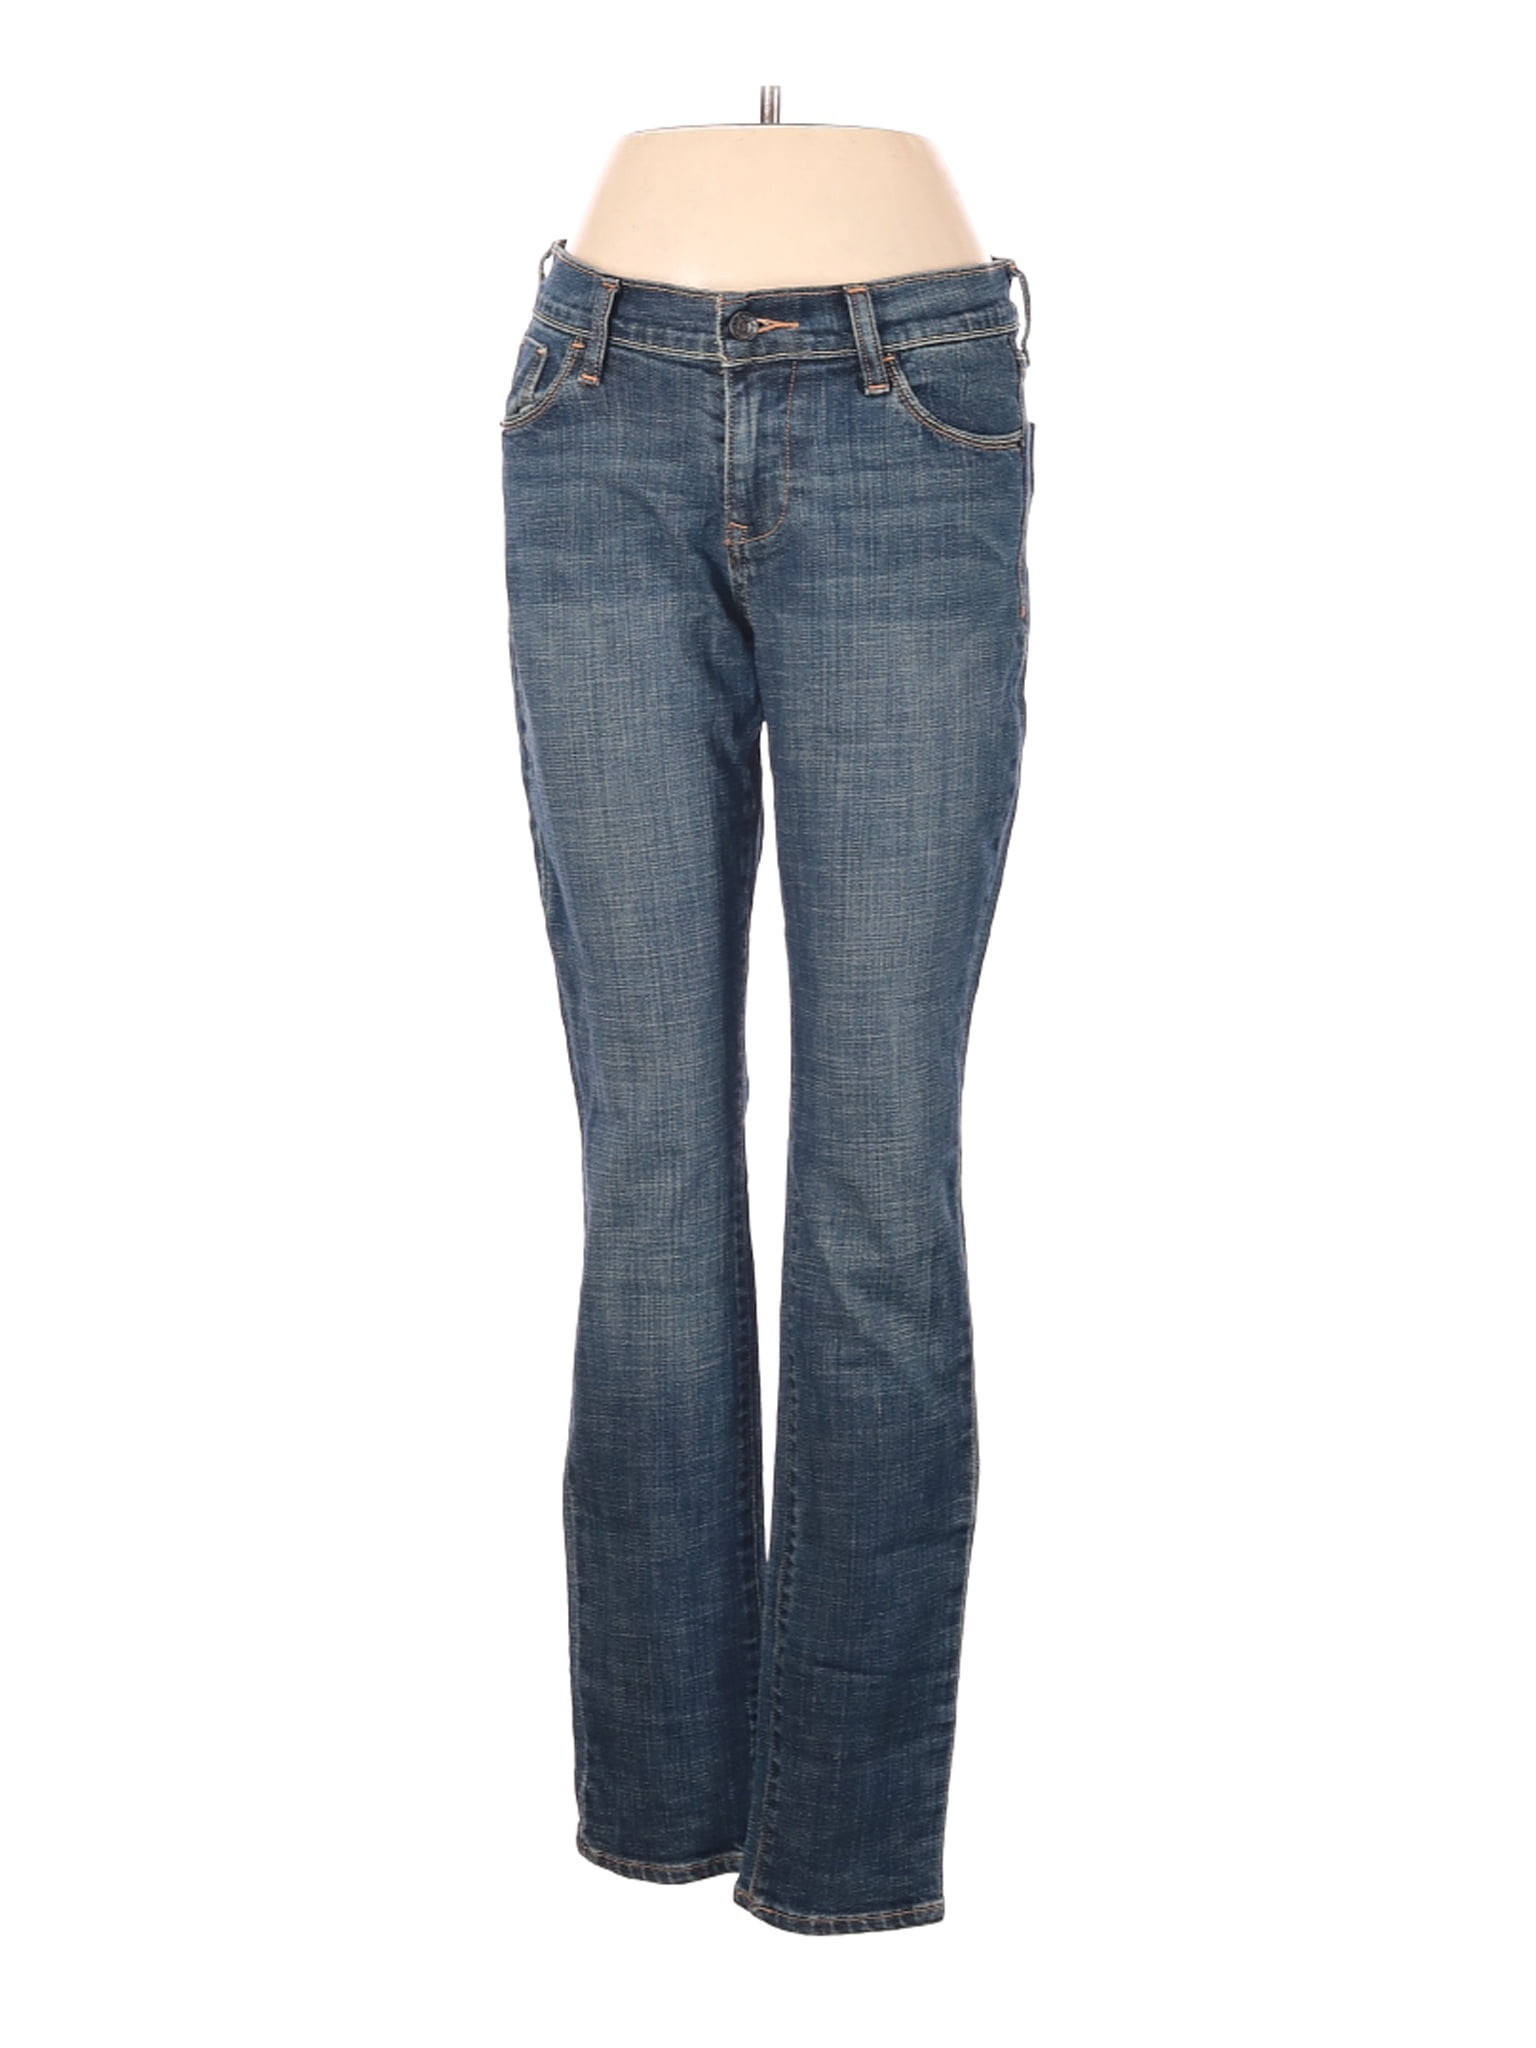 old navy size 2 jeans